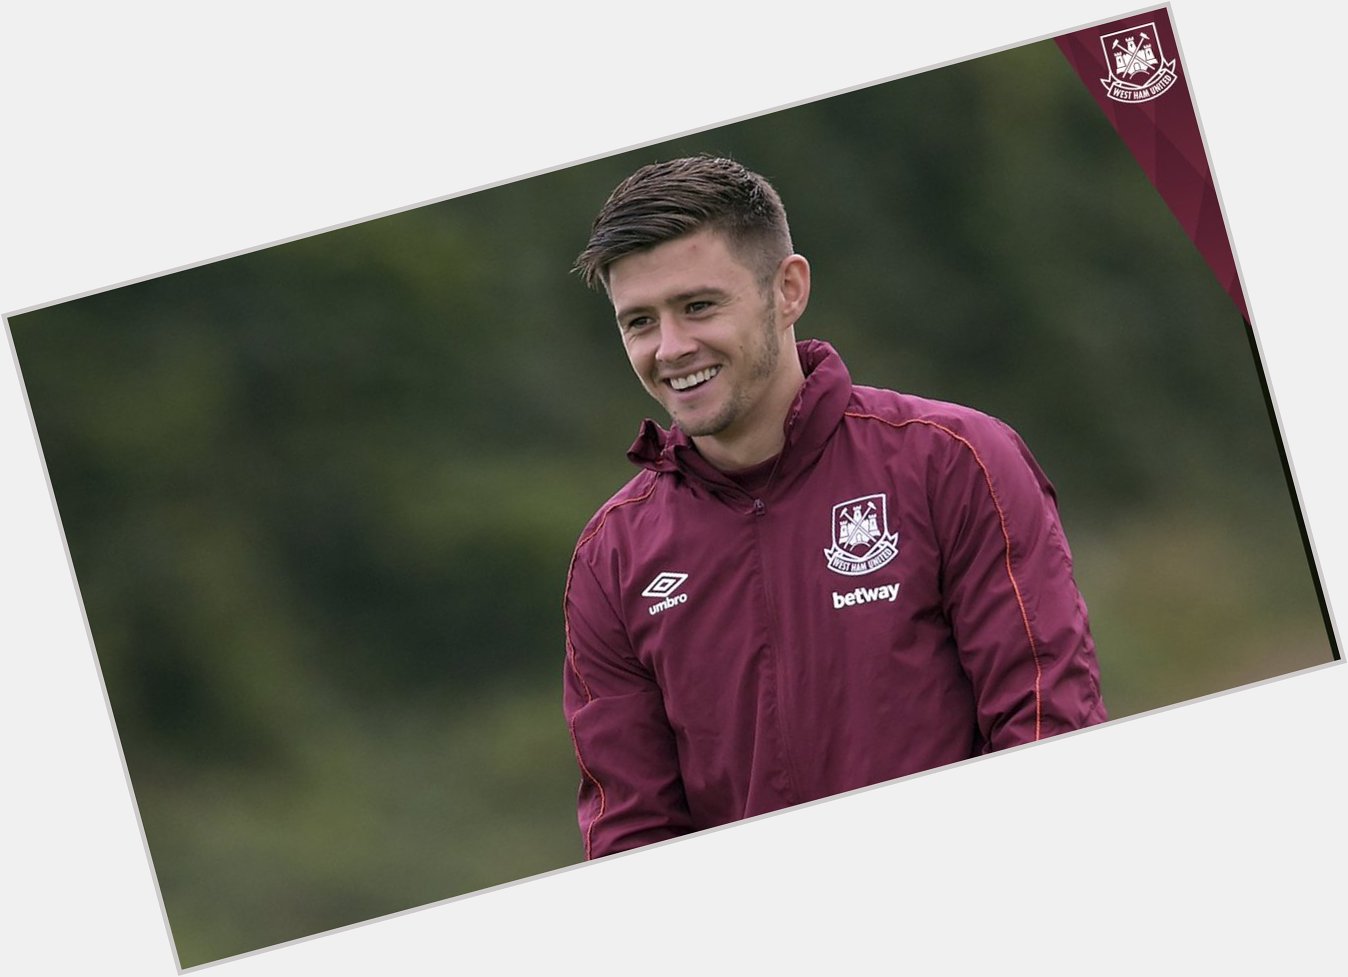 HAPPY BIRTHDAY! Hammer of the Year Aaron_Cresswell turns 26 today! Happy birthday from everyone at the Club! 